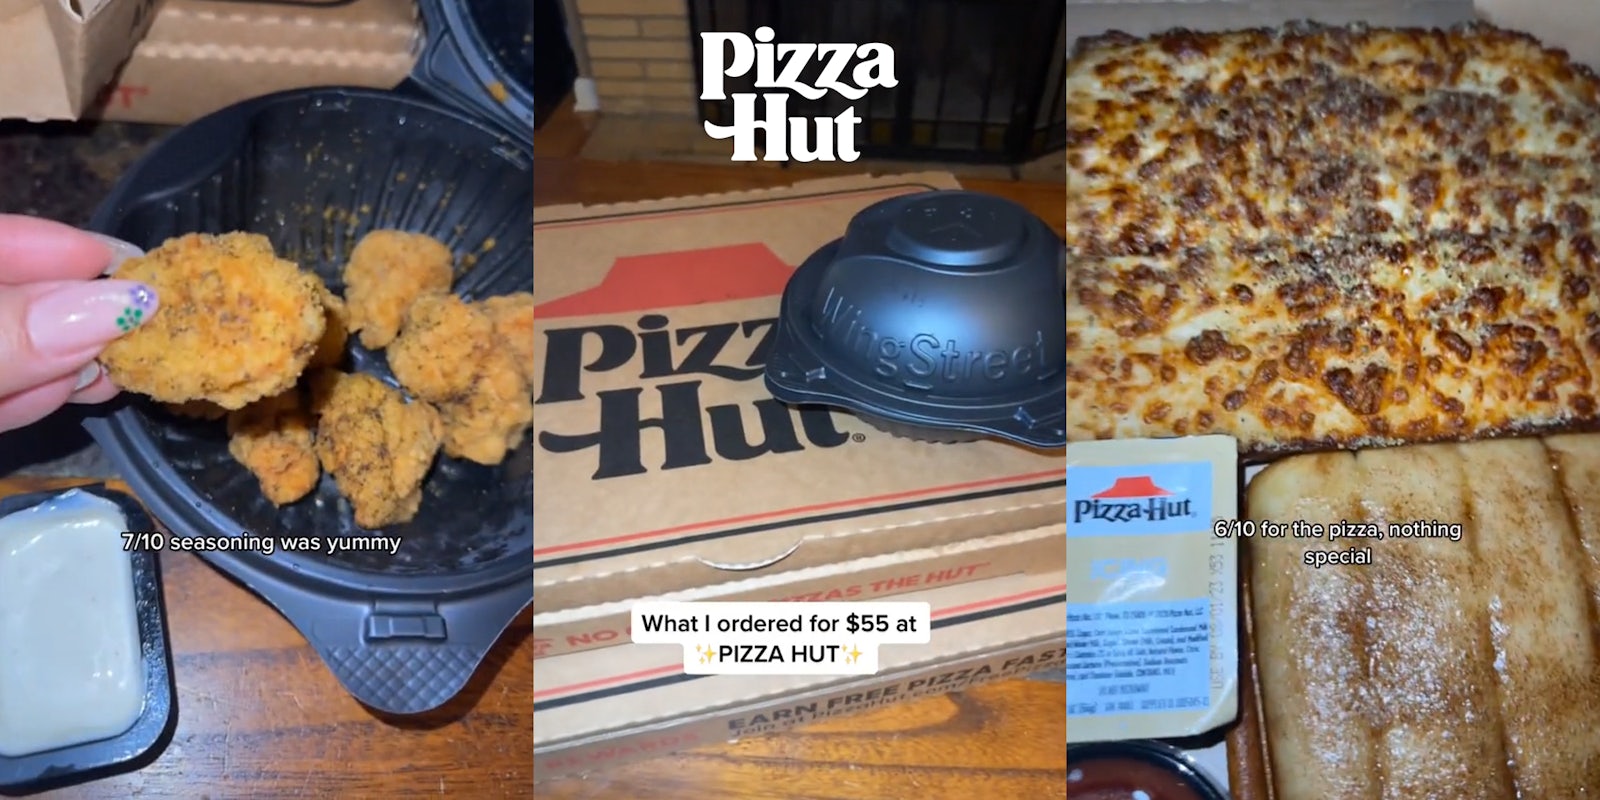 Pizza Hut Lemon Pepper Boneless Wings in hand with caption '7/10 seasoning was yummy' (l) Pizza Hut food on table with Pizza Hut logo at top with caption 'What I ordered for $55 at PIZZA HUT' (c) Pizza Hut food in box with caption '6/10 for the pizza, nothing special' (r)